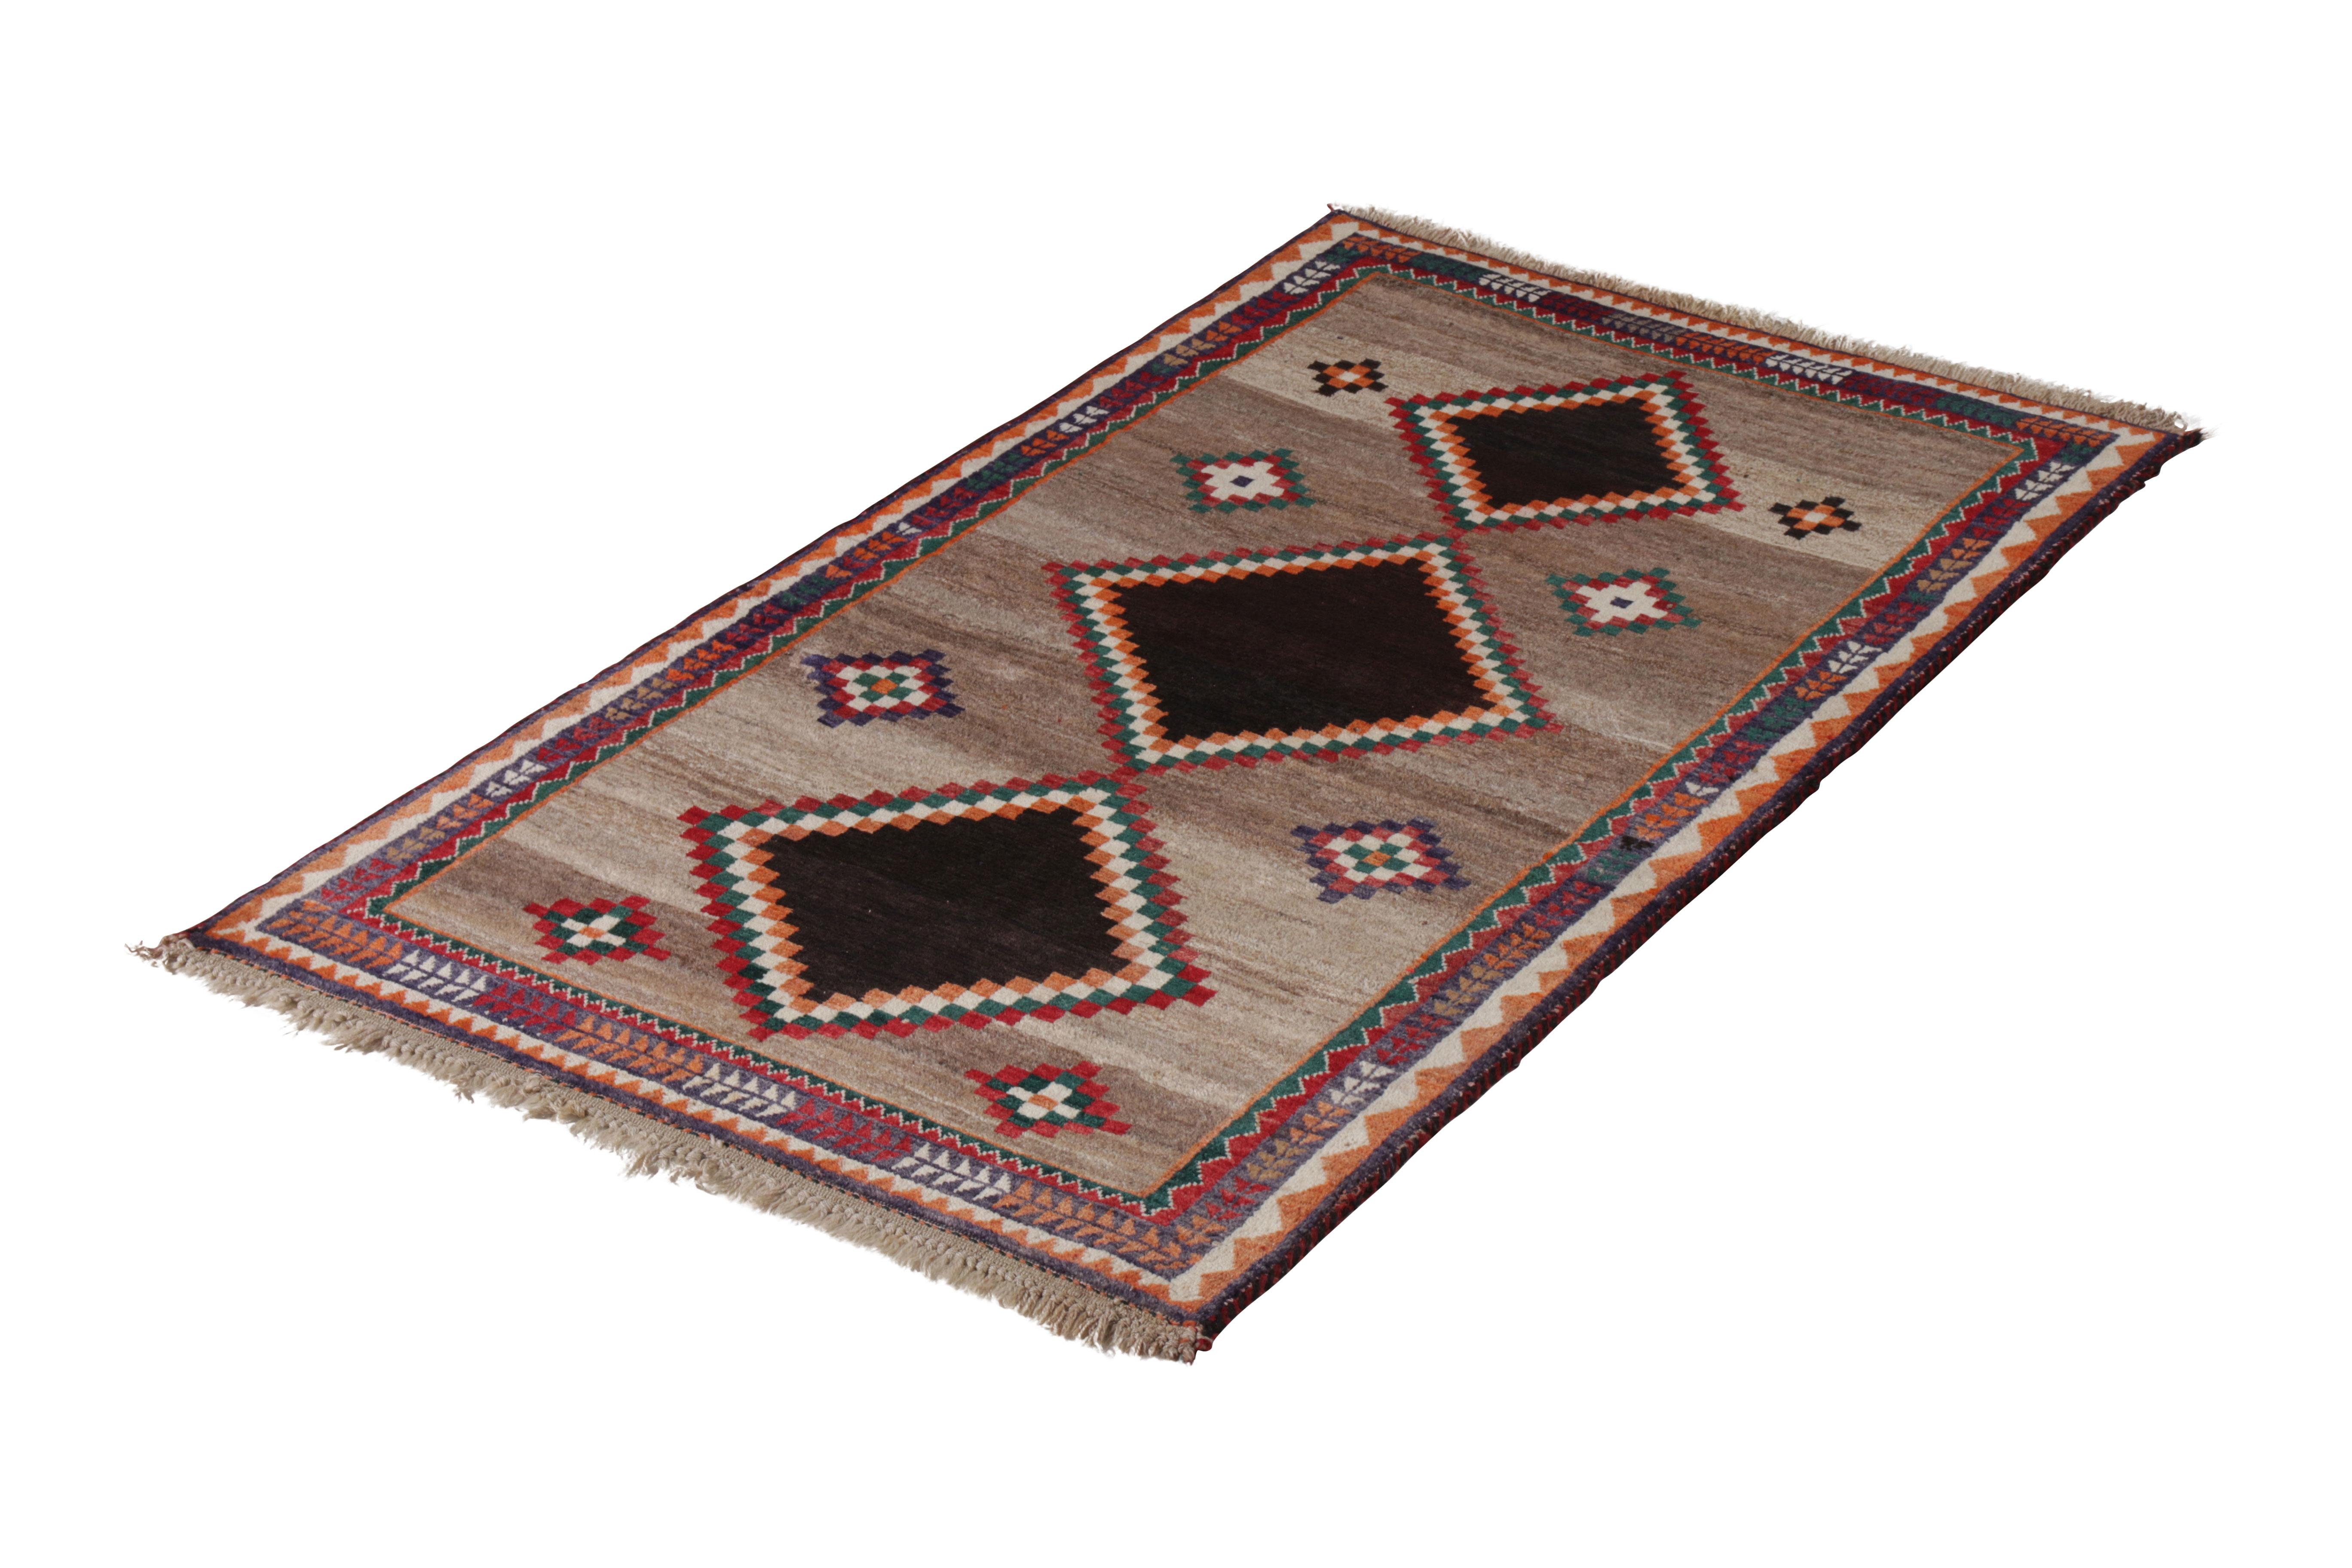 Hand knotted in wool originating circa 1920-1930, this antique Persian rug connotes a tribal Gabbeh rug design marrying a comfortable beige-brown medallion pattern with accenting tribal colorways. The natural dimensionality of the varied earth tones